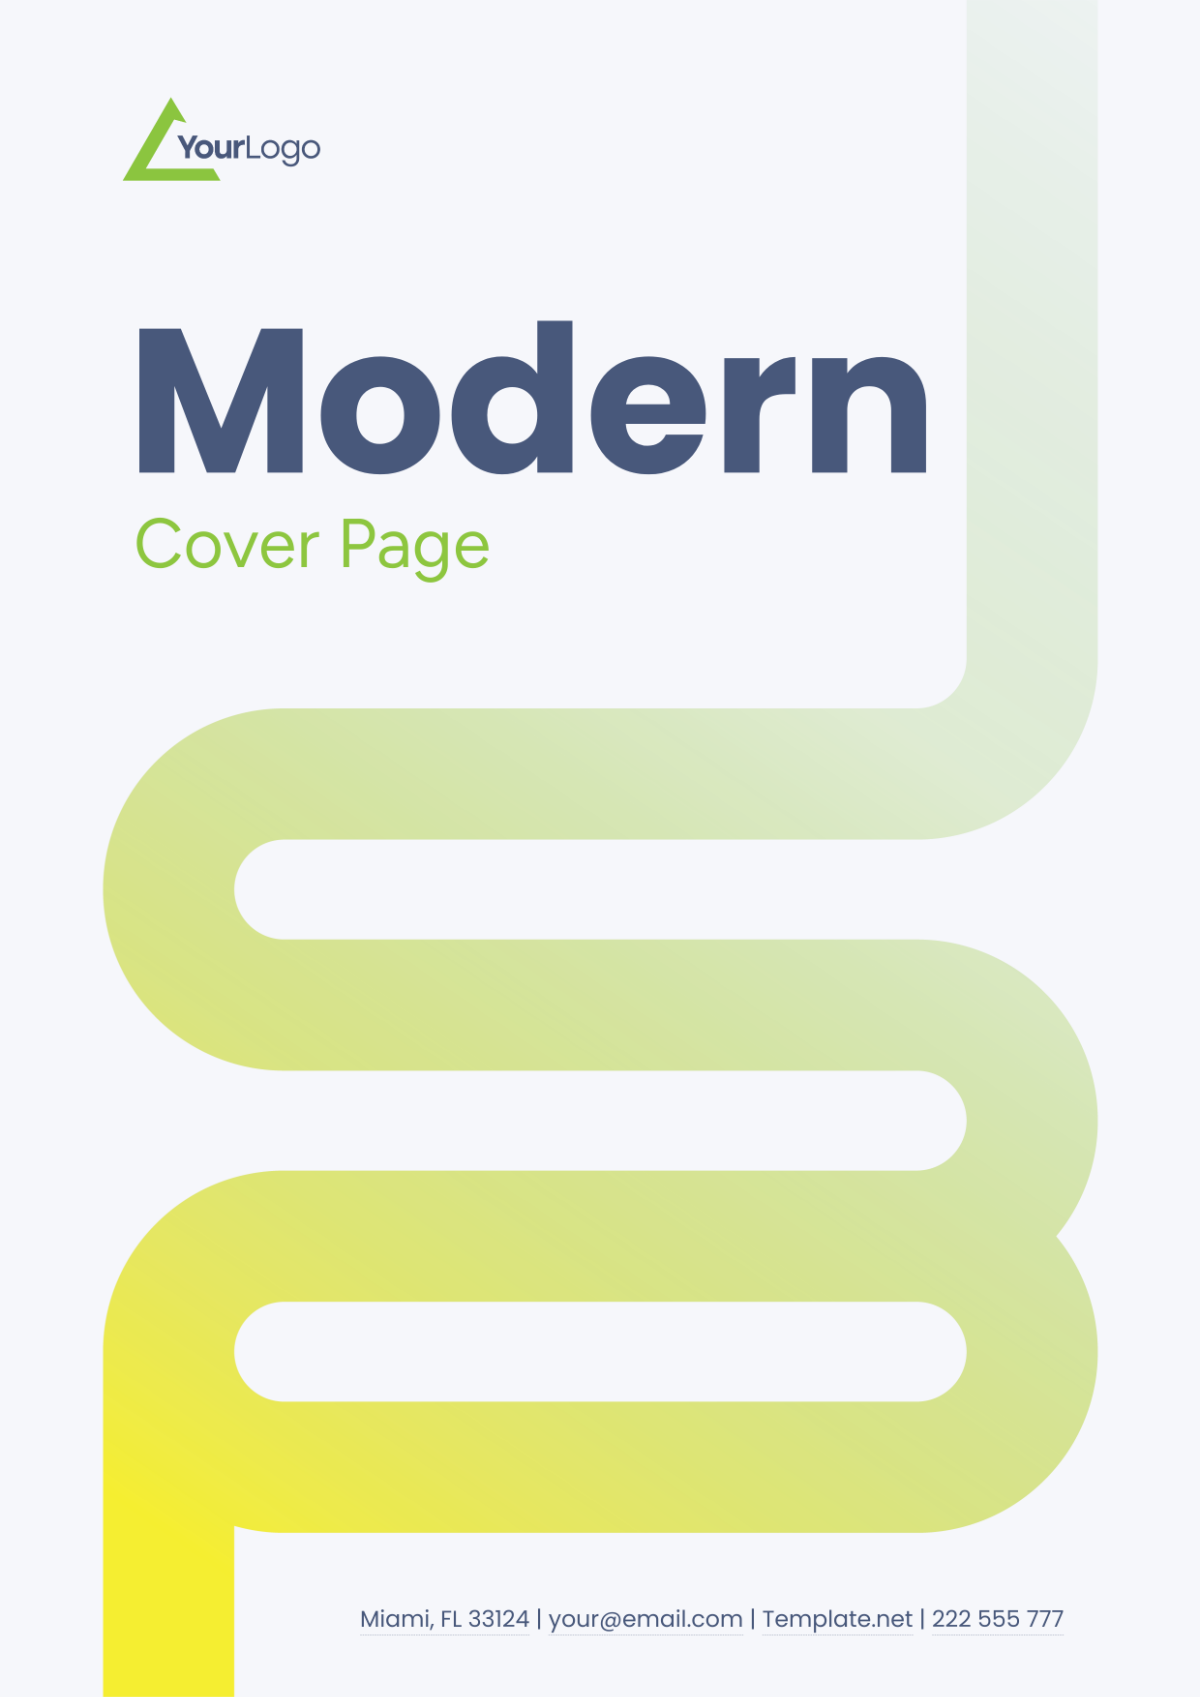 Modern Heading Cover Page